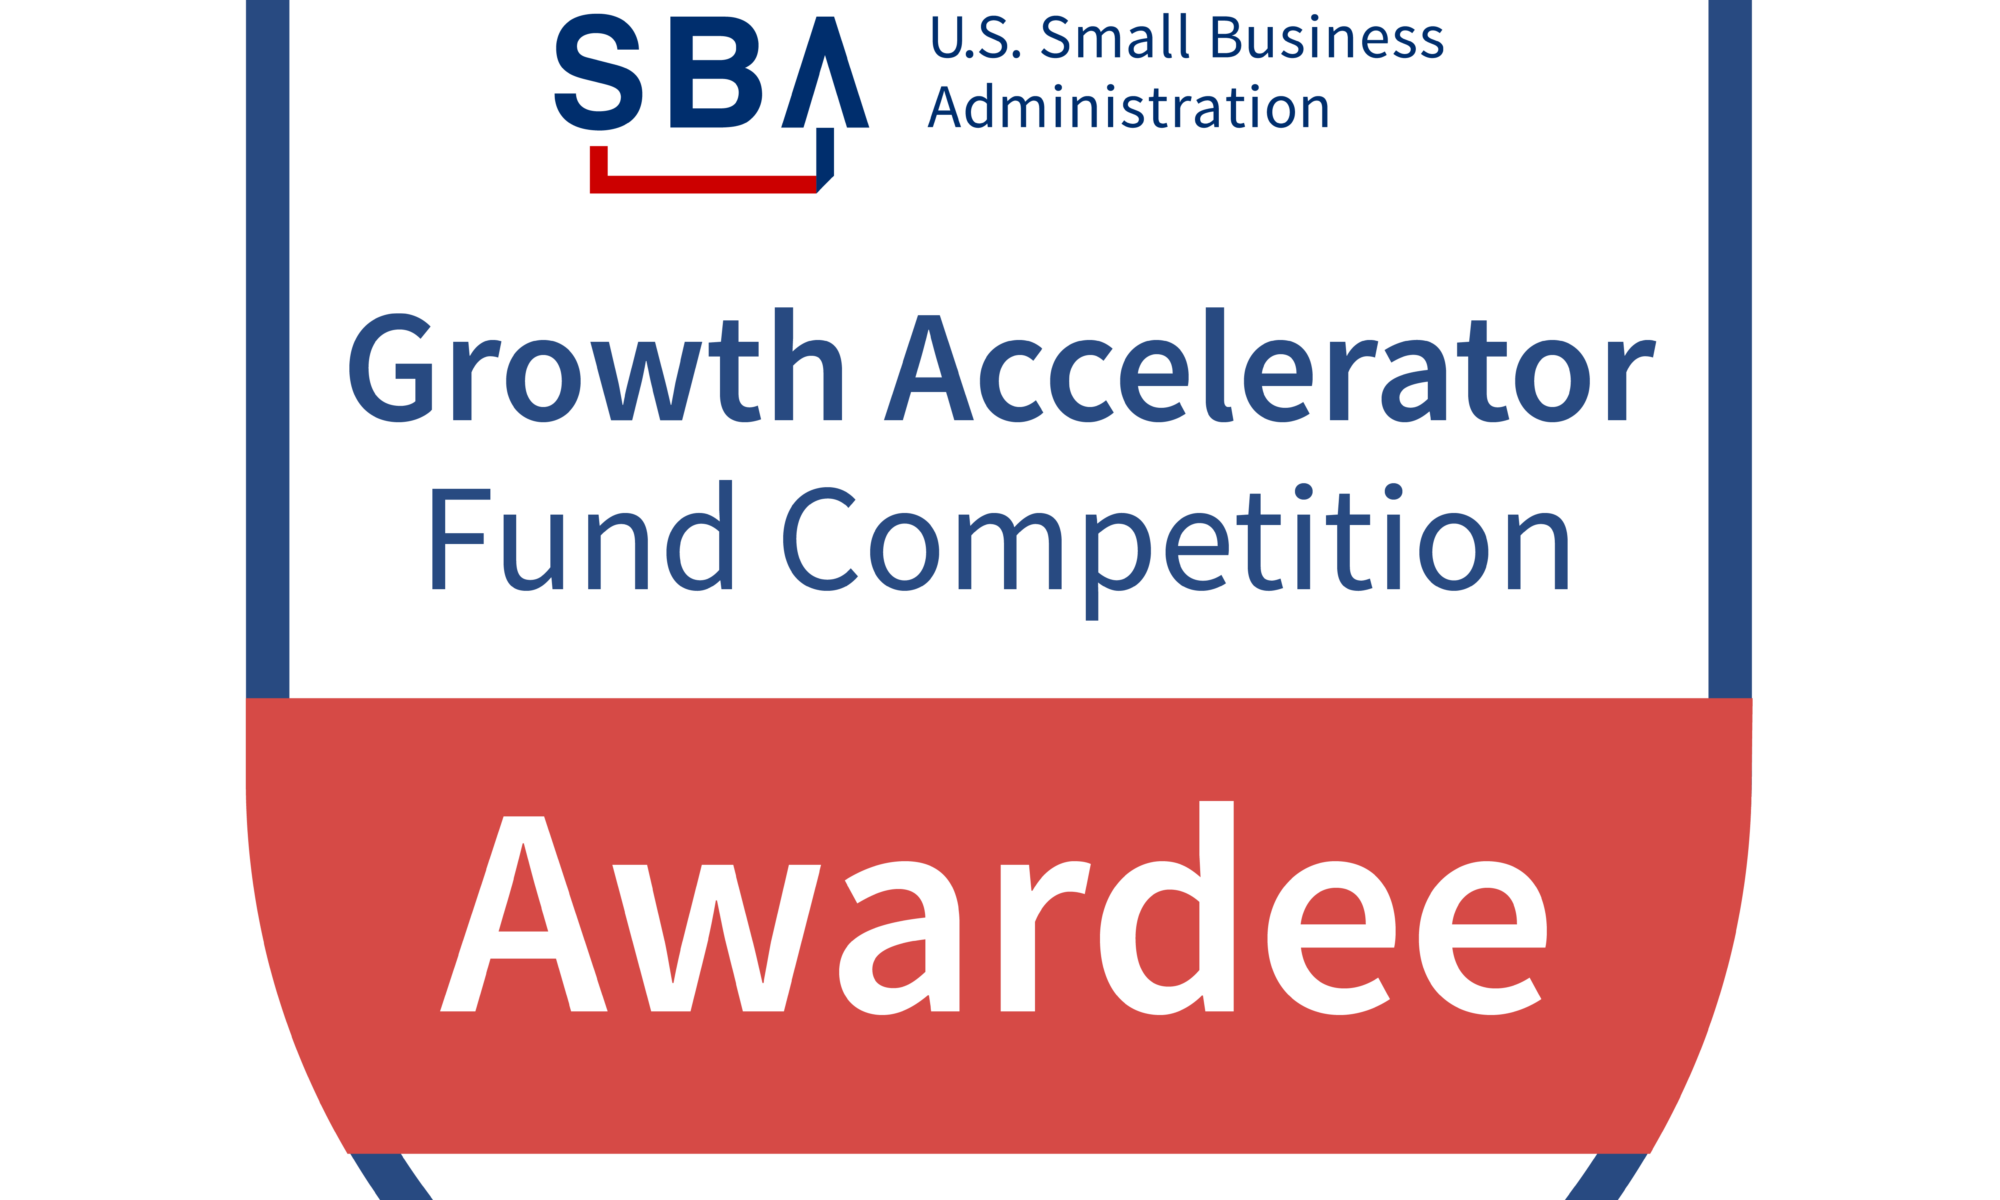 EnterpriseWorks Wins Stage One of the U.S. Small Business Administration’s 2024 Growth Accelerator Fund Competition 5 EnterpriseWorks Wins Stage One of the U.S. Small Business Administration’s 2024 Growth Accelerator Fund Competition